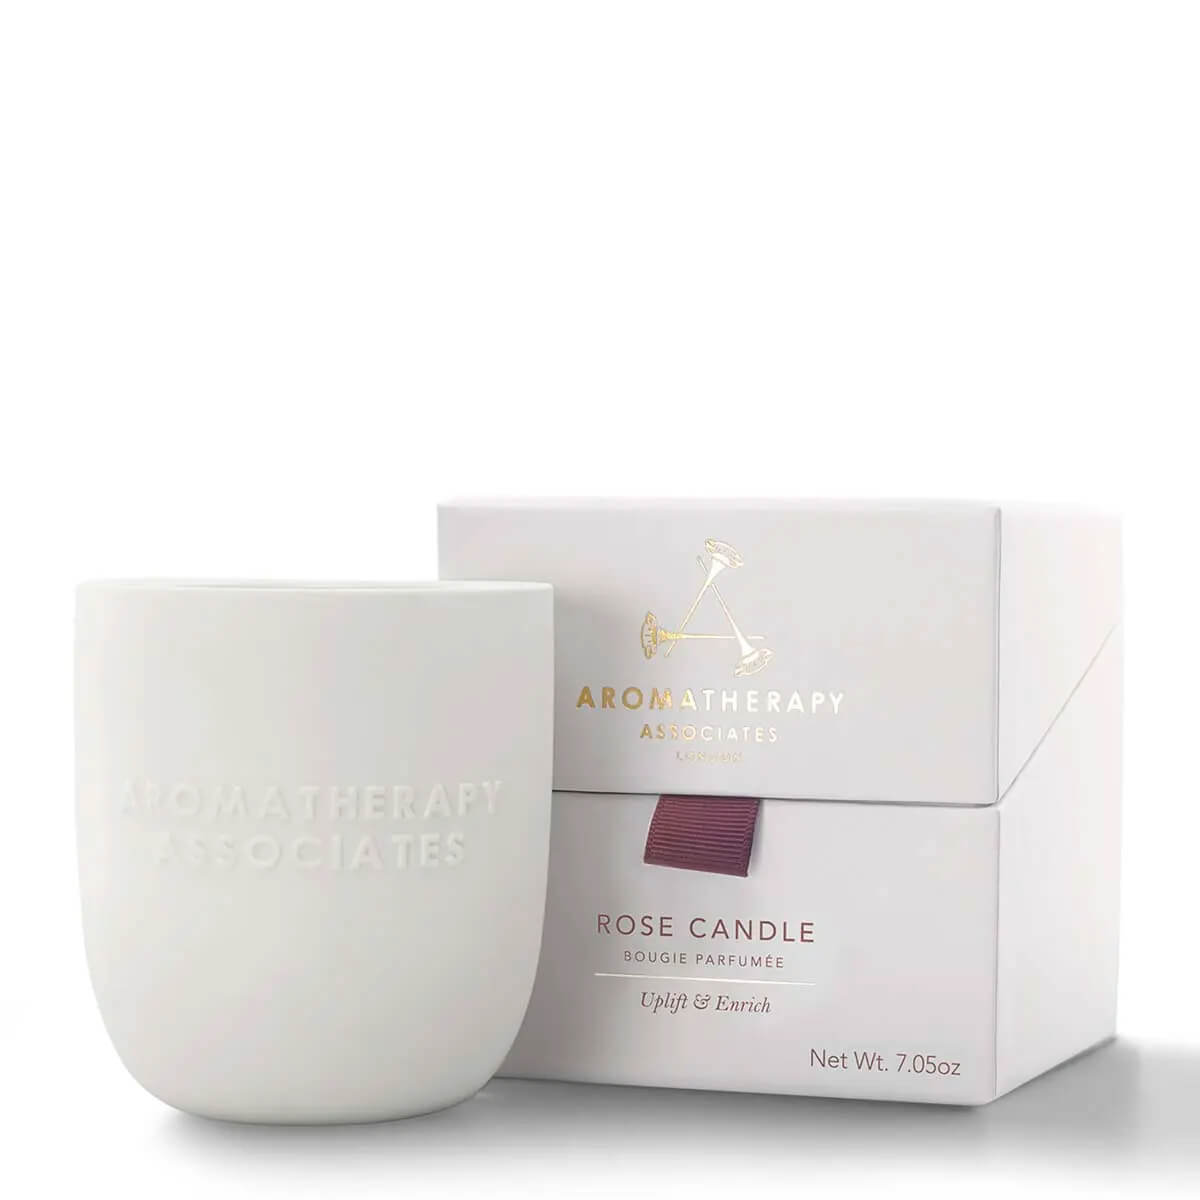 Rose Candle by Aromatherapy Associates